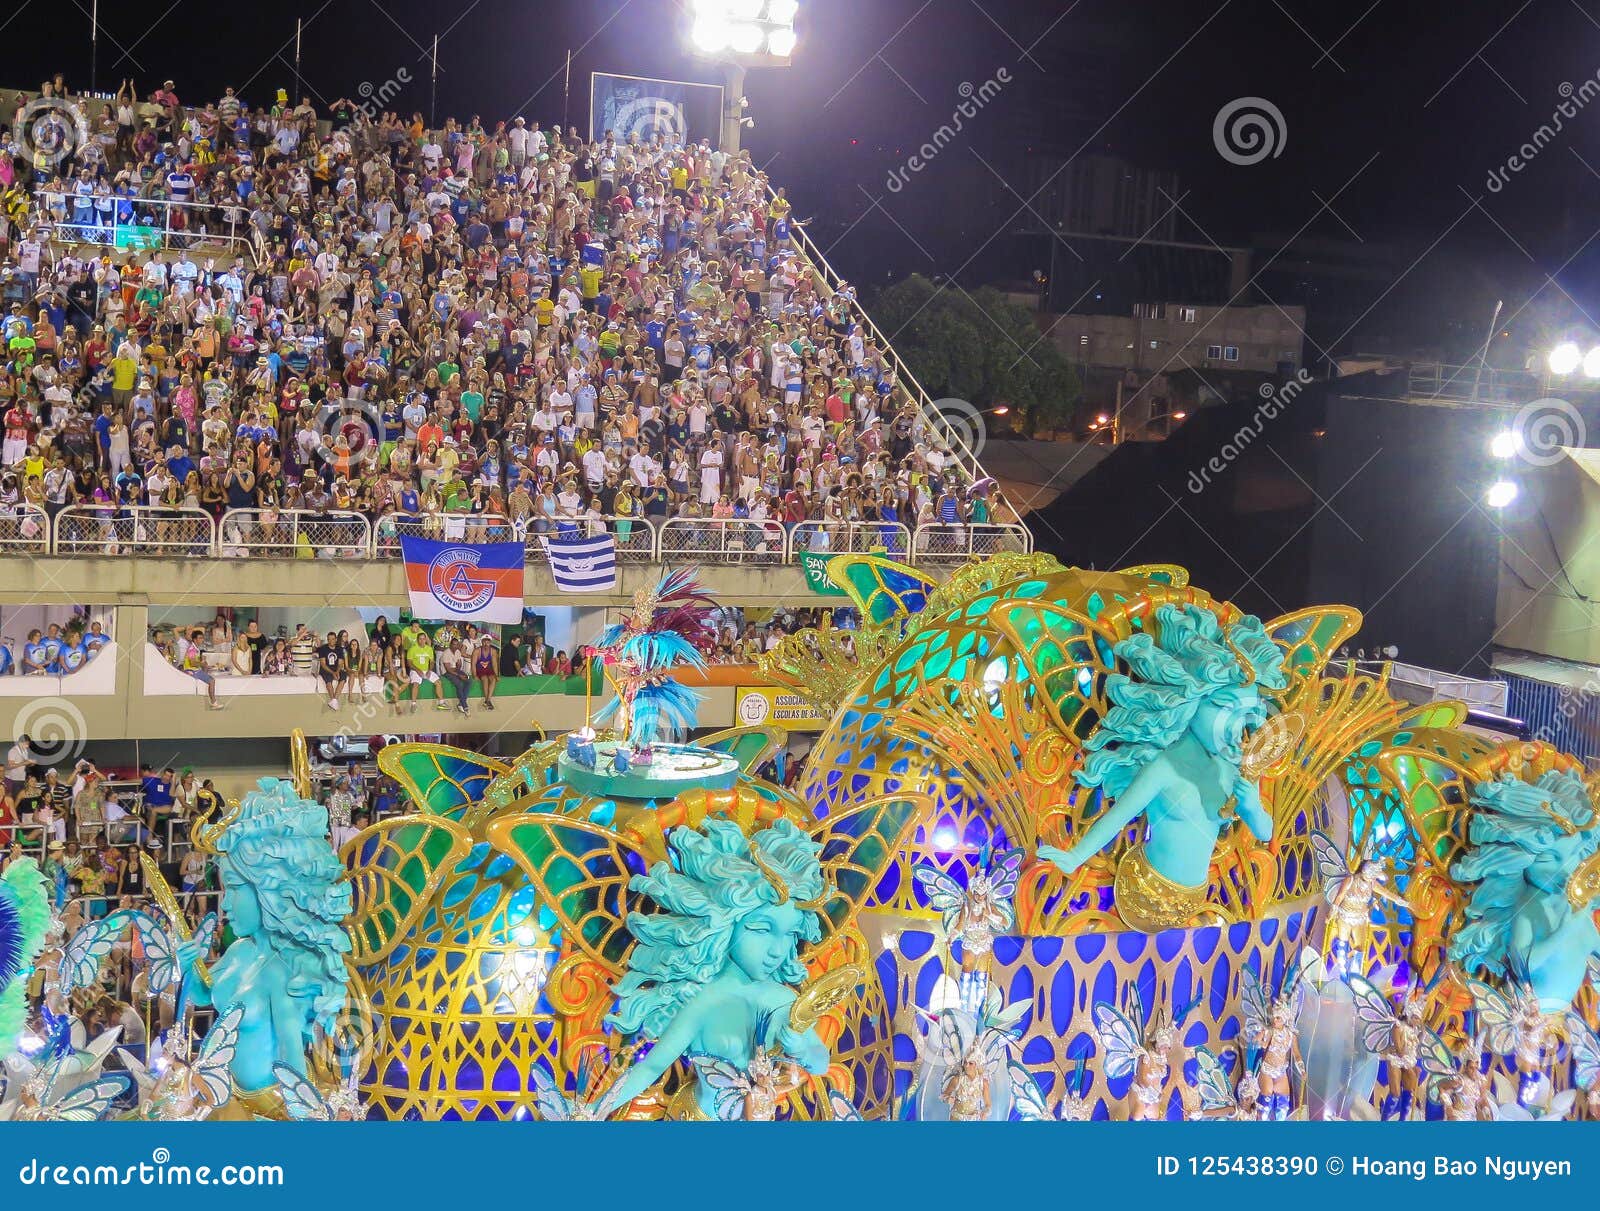 The Brazilian Carnival, or Carnaval is an annual festival in